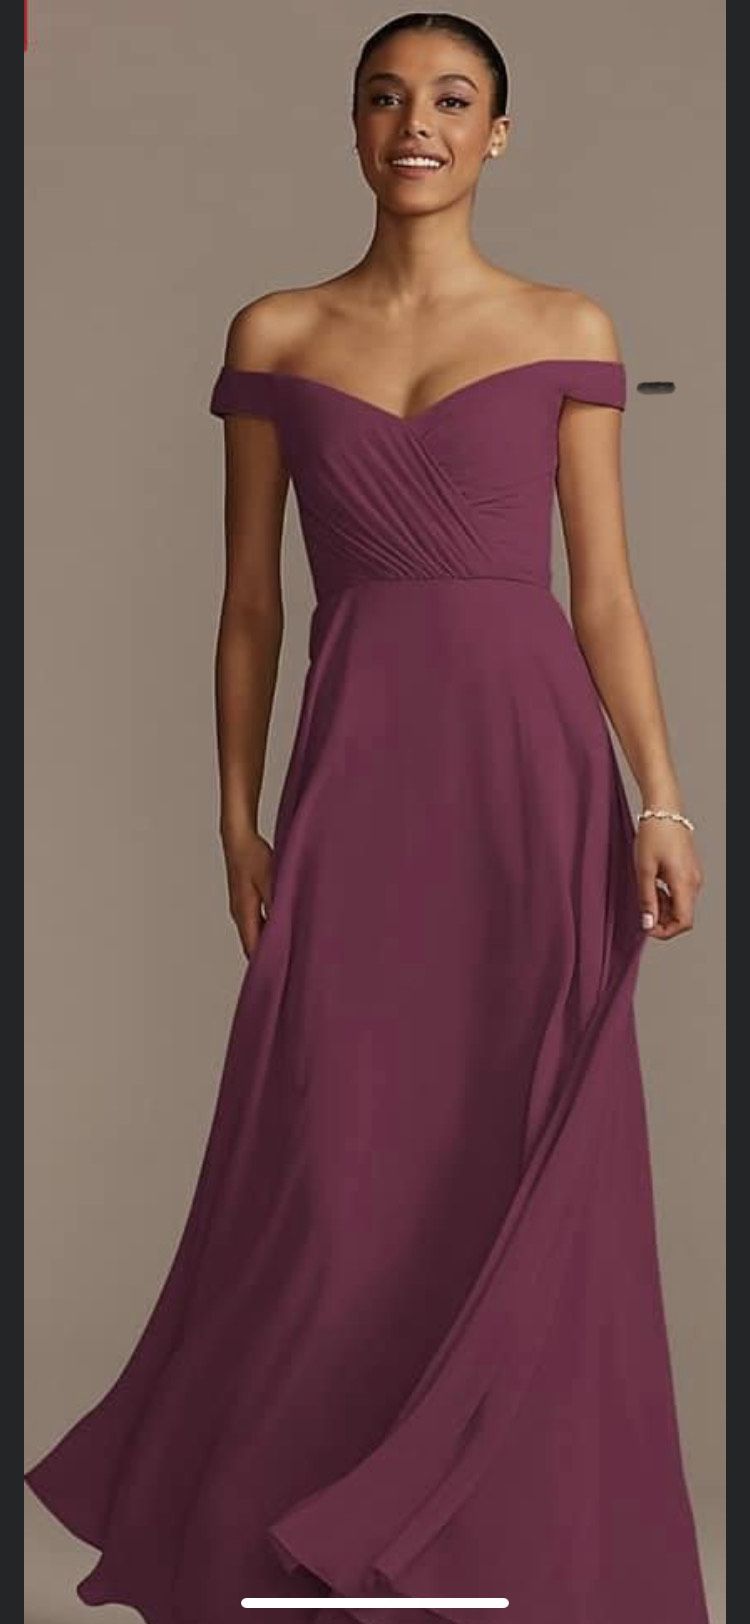 Plus Size 22 Bridesmaid Off The Shoulder Burgundy Red A-line Dress on Queenly